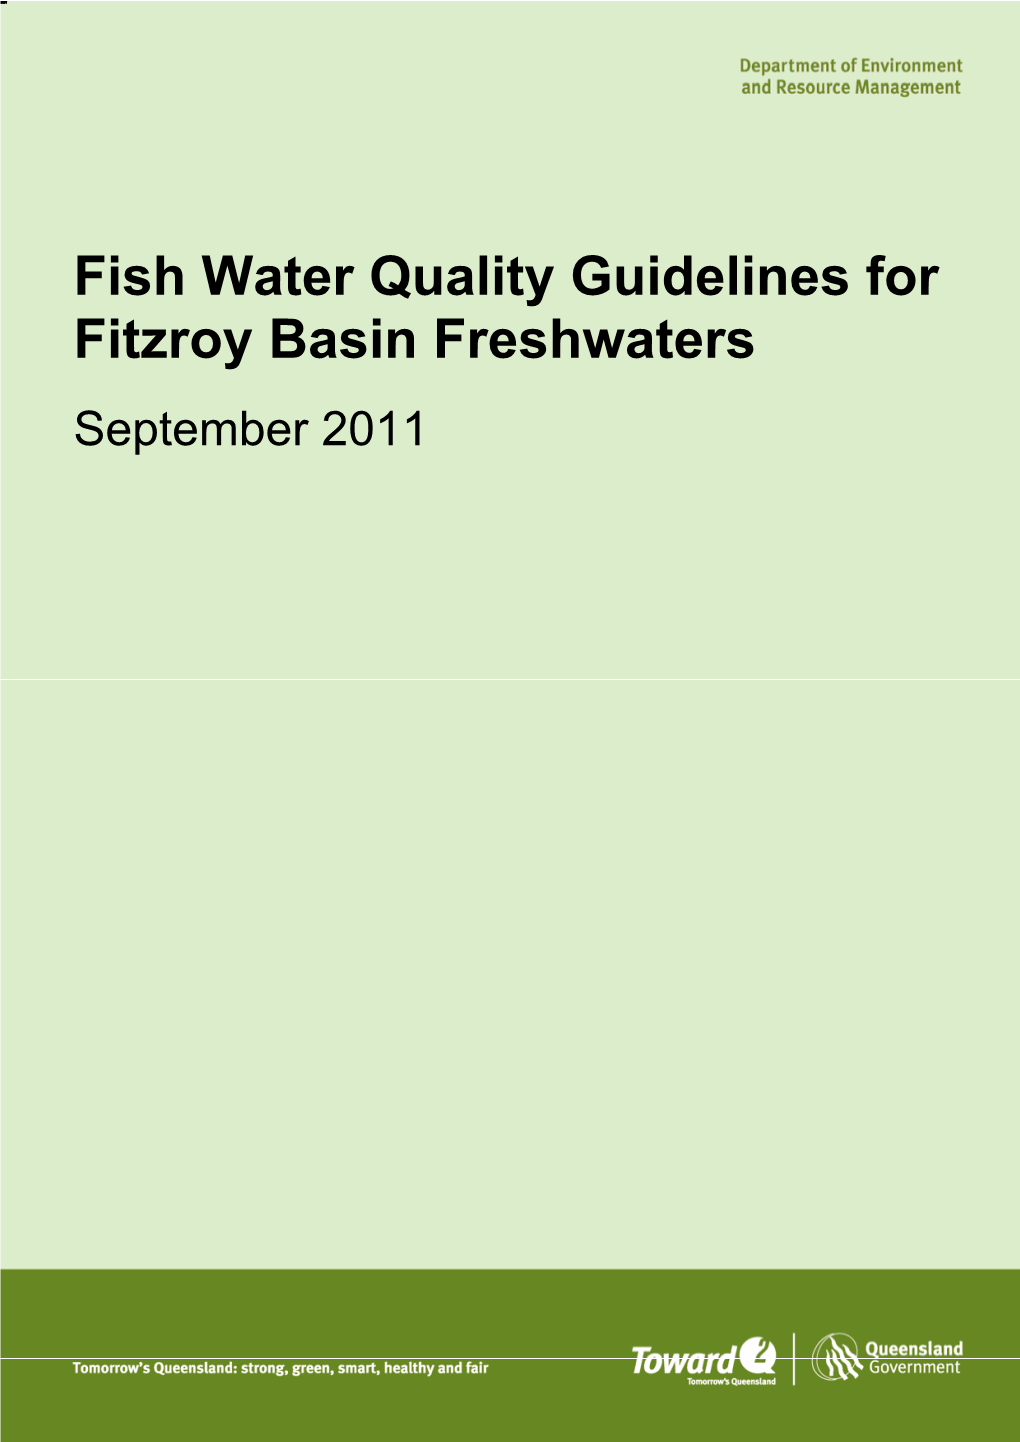 Fish Water Quality Guidelines for Fitzroy Basin Freshwaters September 2011